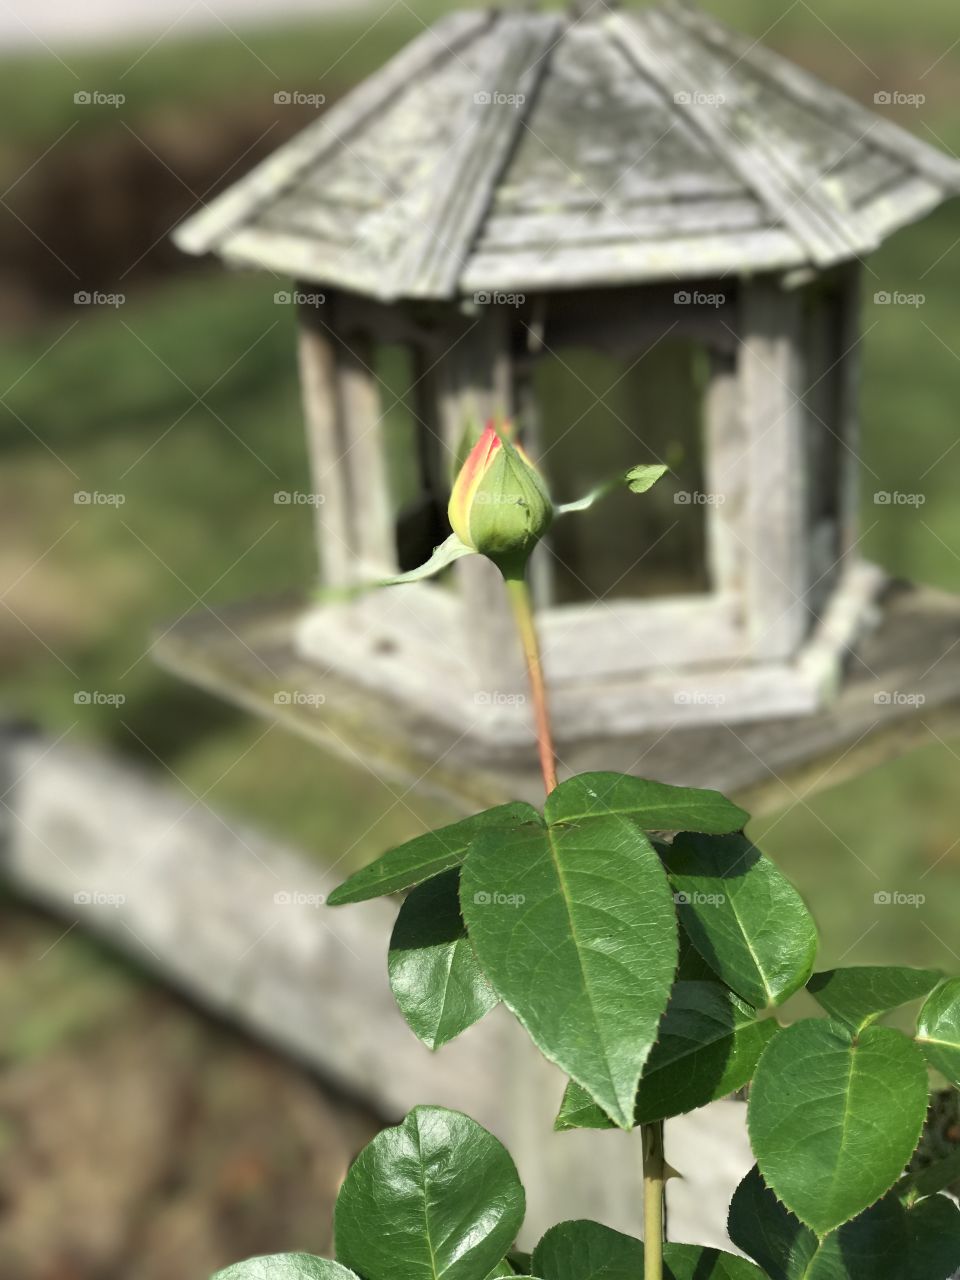 A rose blooming in the fall